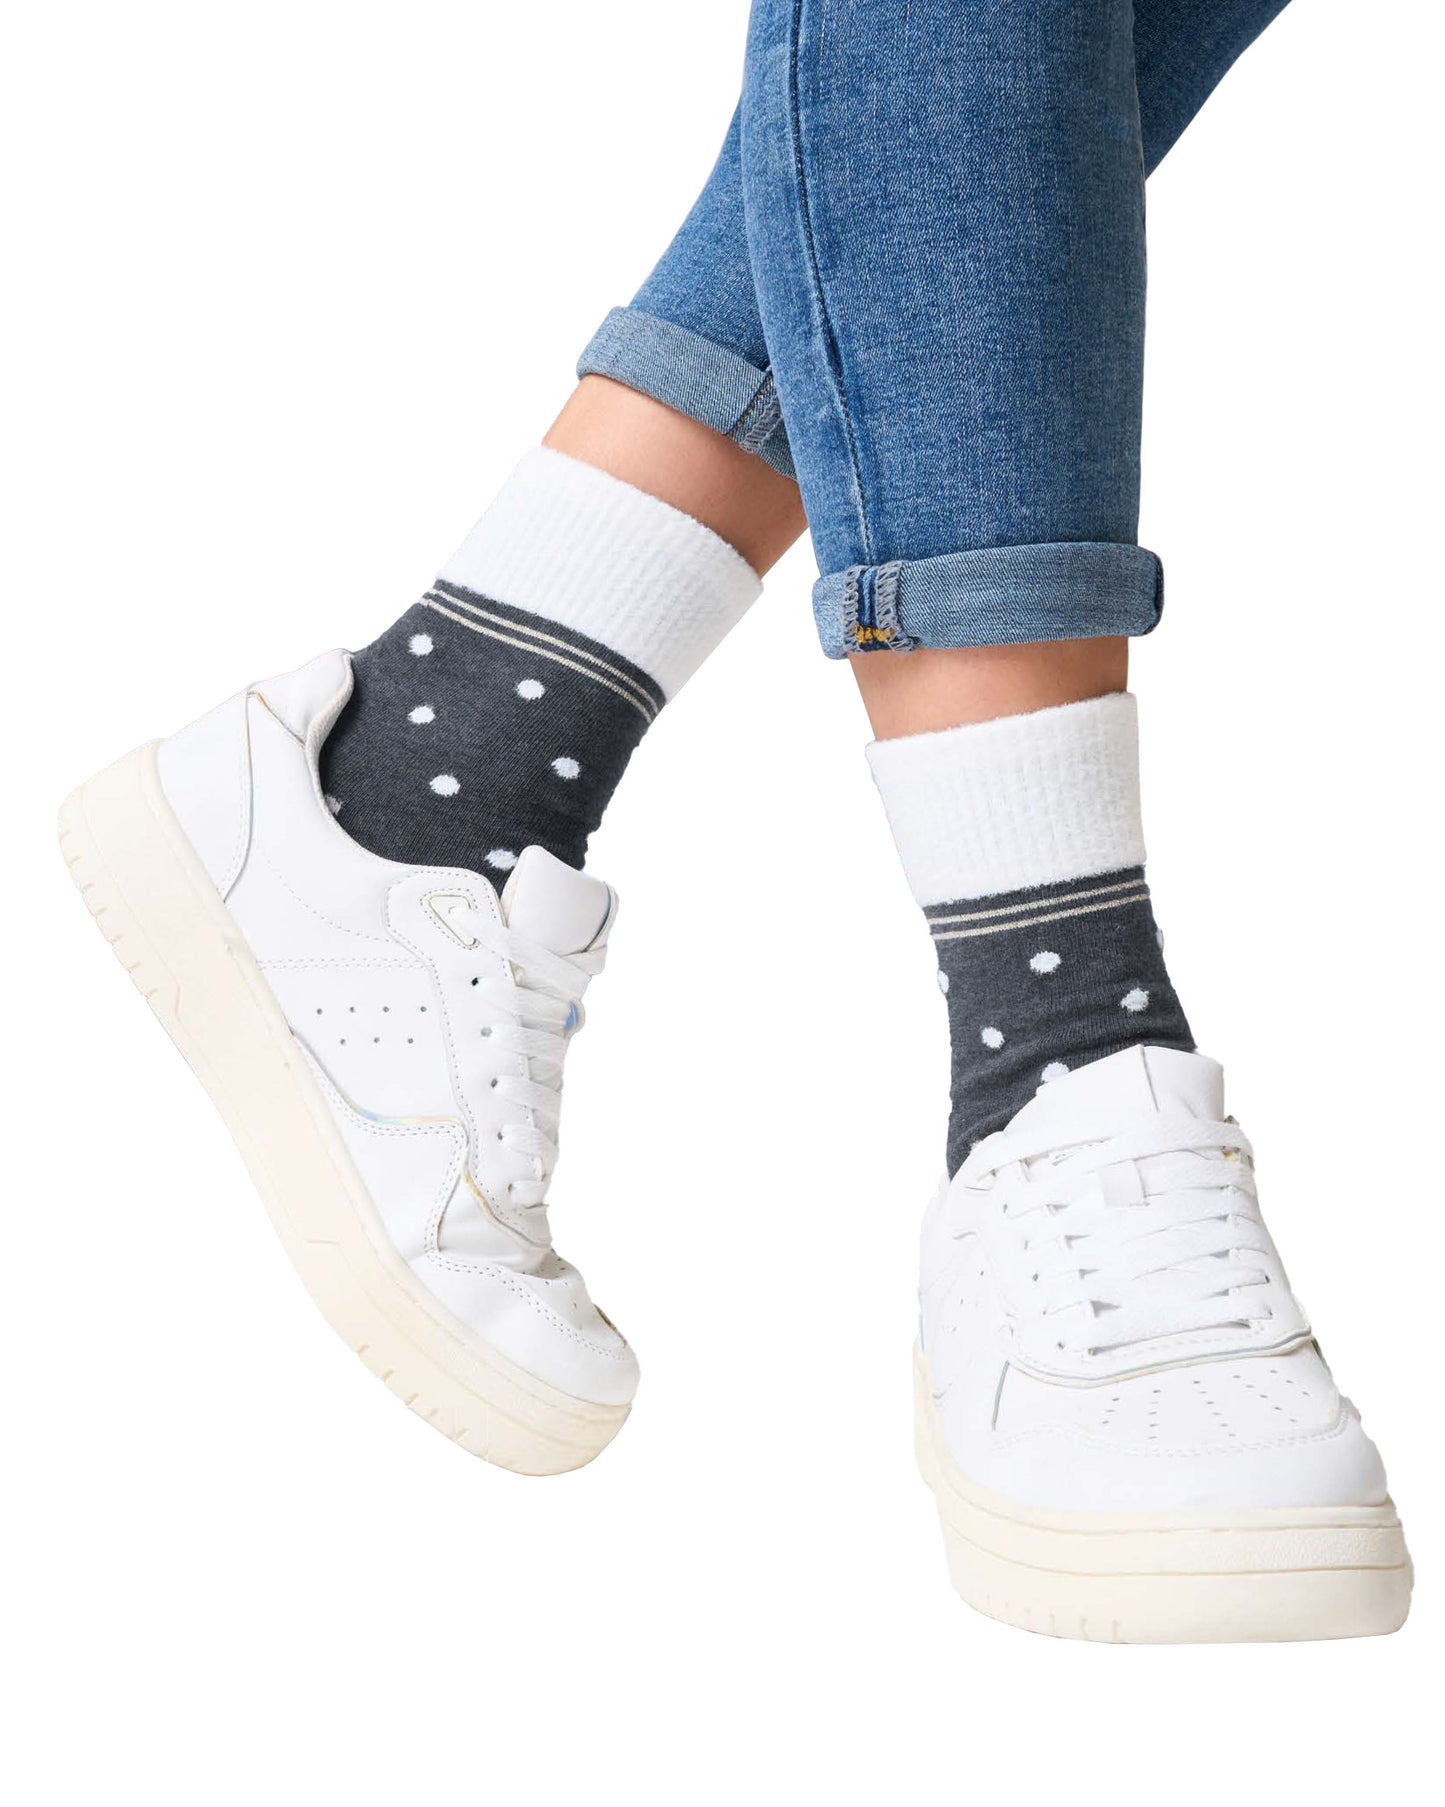 SiSi Puff Calzino - Grey cotton mix ankle socks with a contrasting cream fluffy faux fur polka dot pattern, double faux fur cuff with gold lamé stripe.